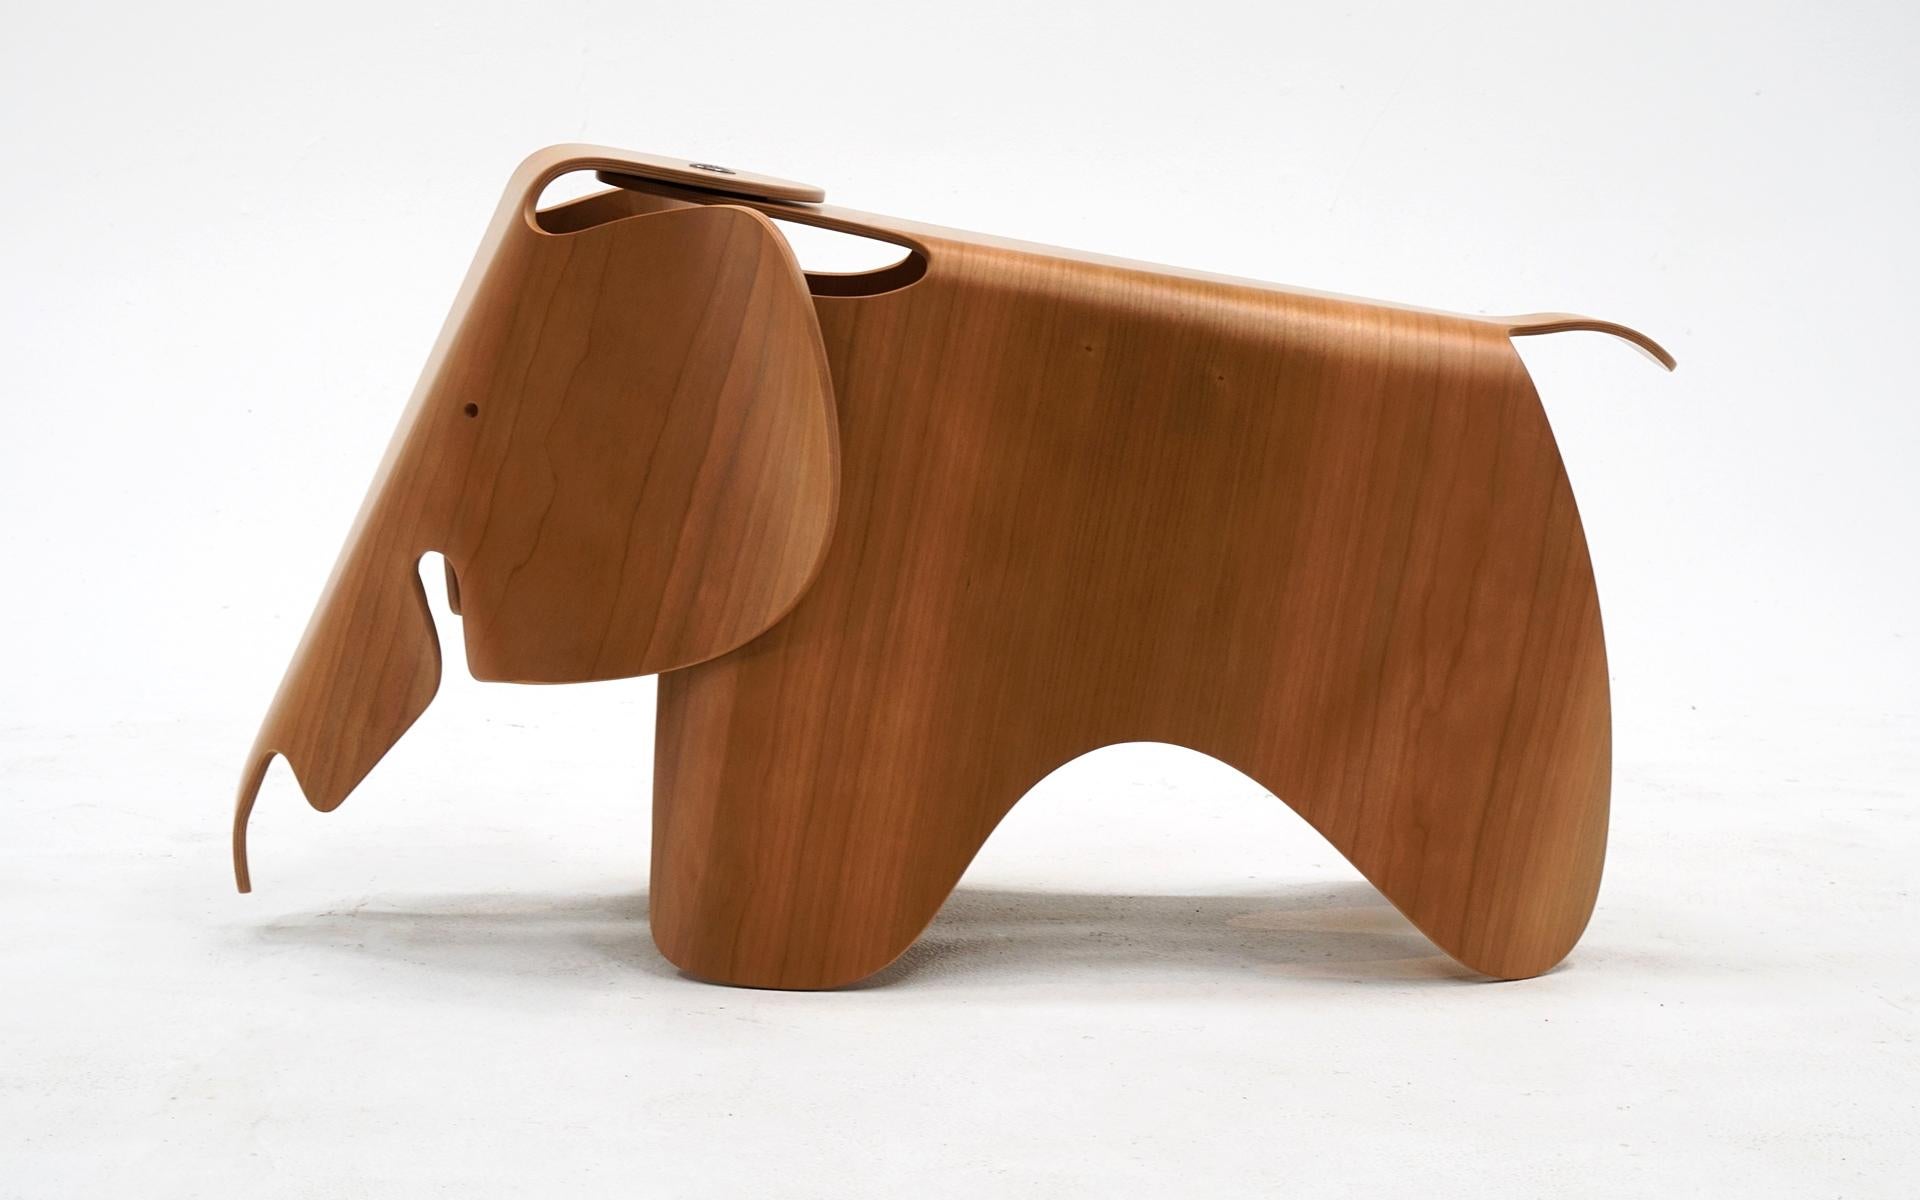 Charles and Ray Eames plywood elephant designed in 1945 and produced currently by Vitra. This is brand new with the original box which was only opened for photos.